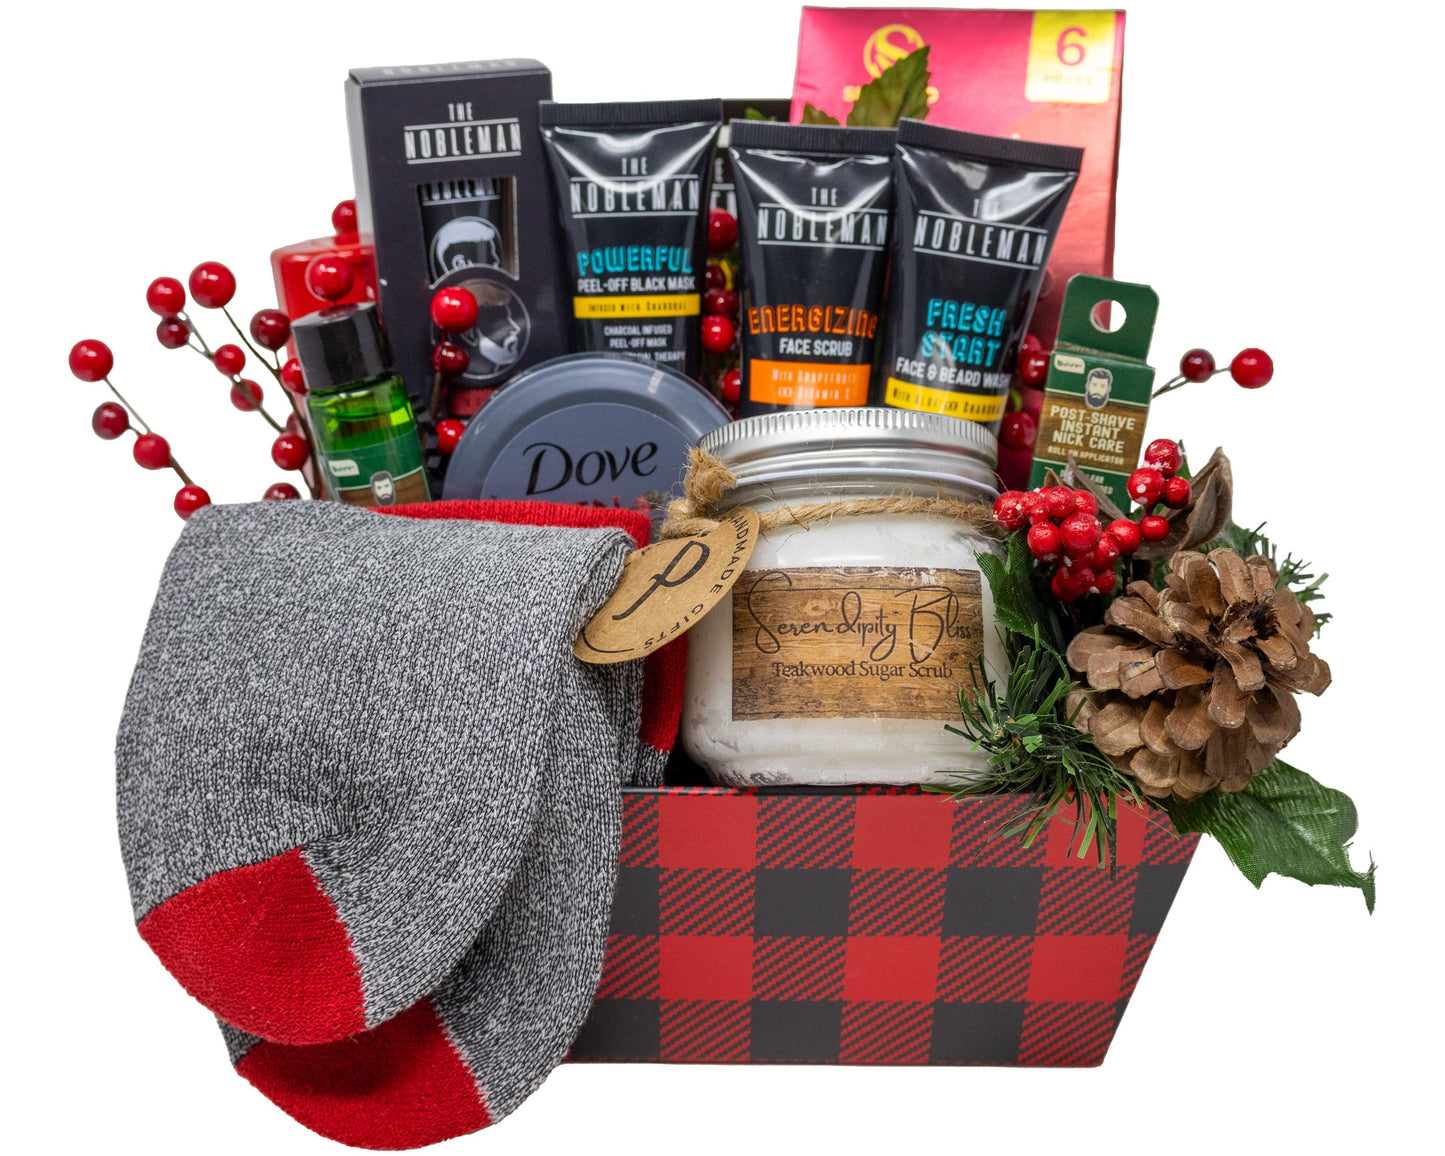 Manly Man Beard and Body Grooming Gift Basket